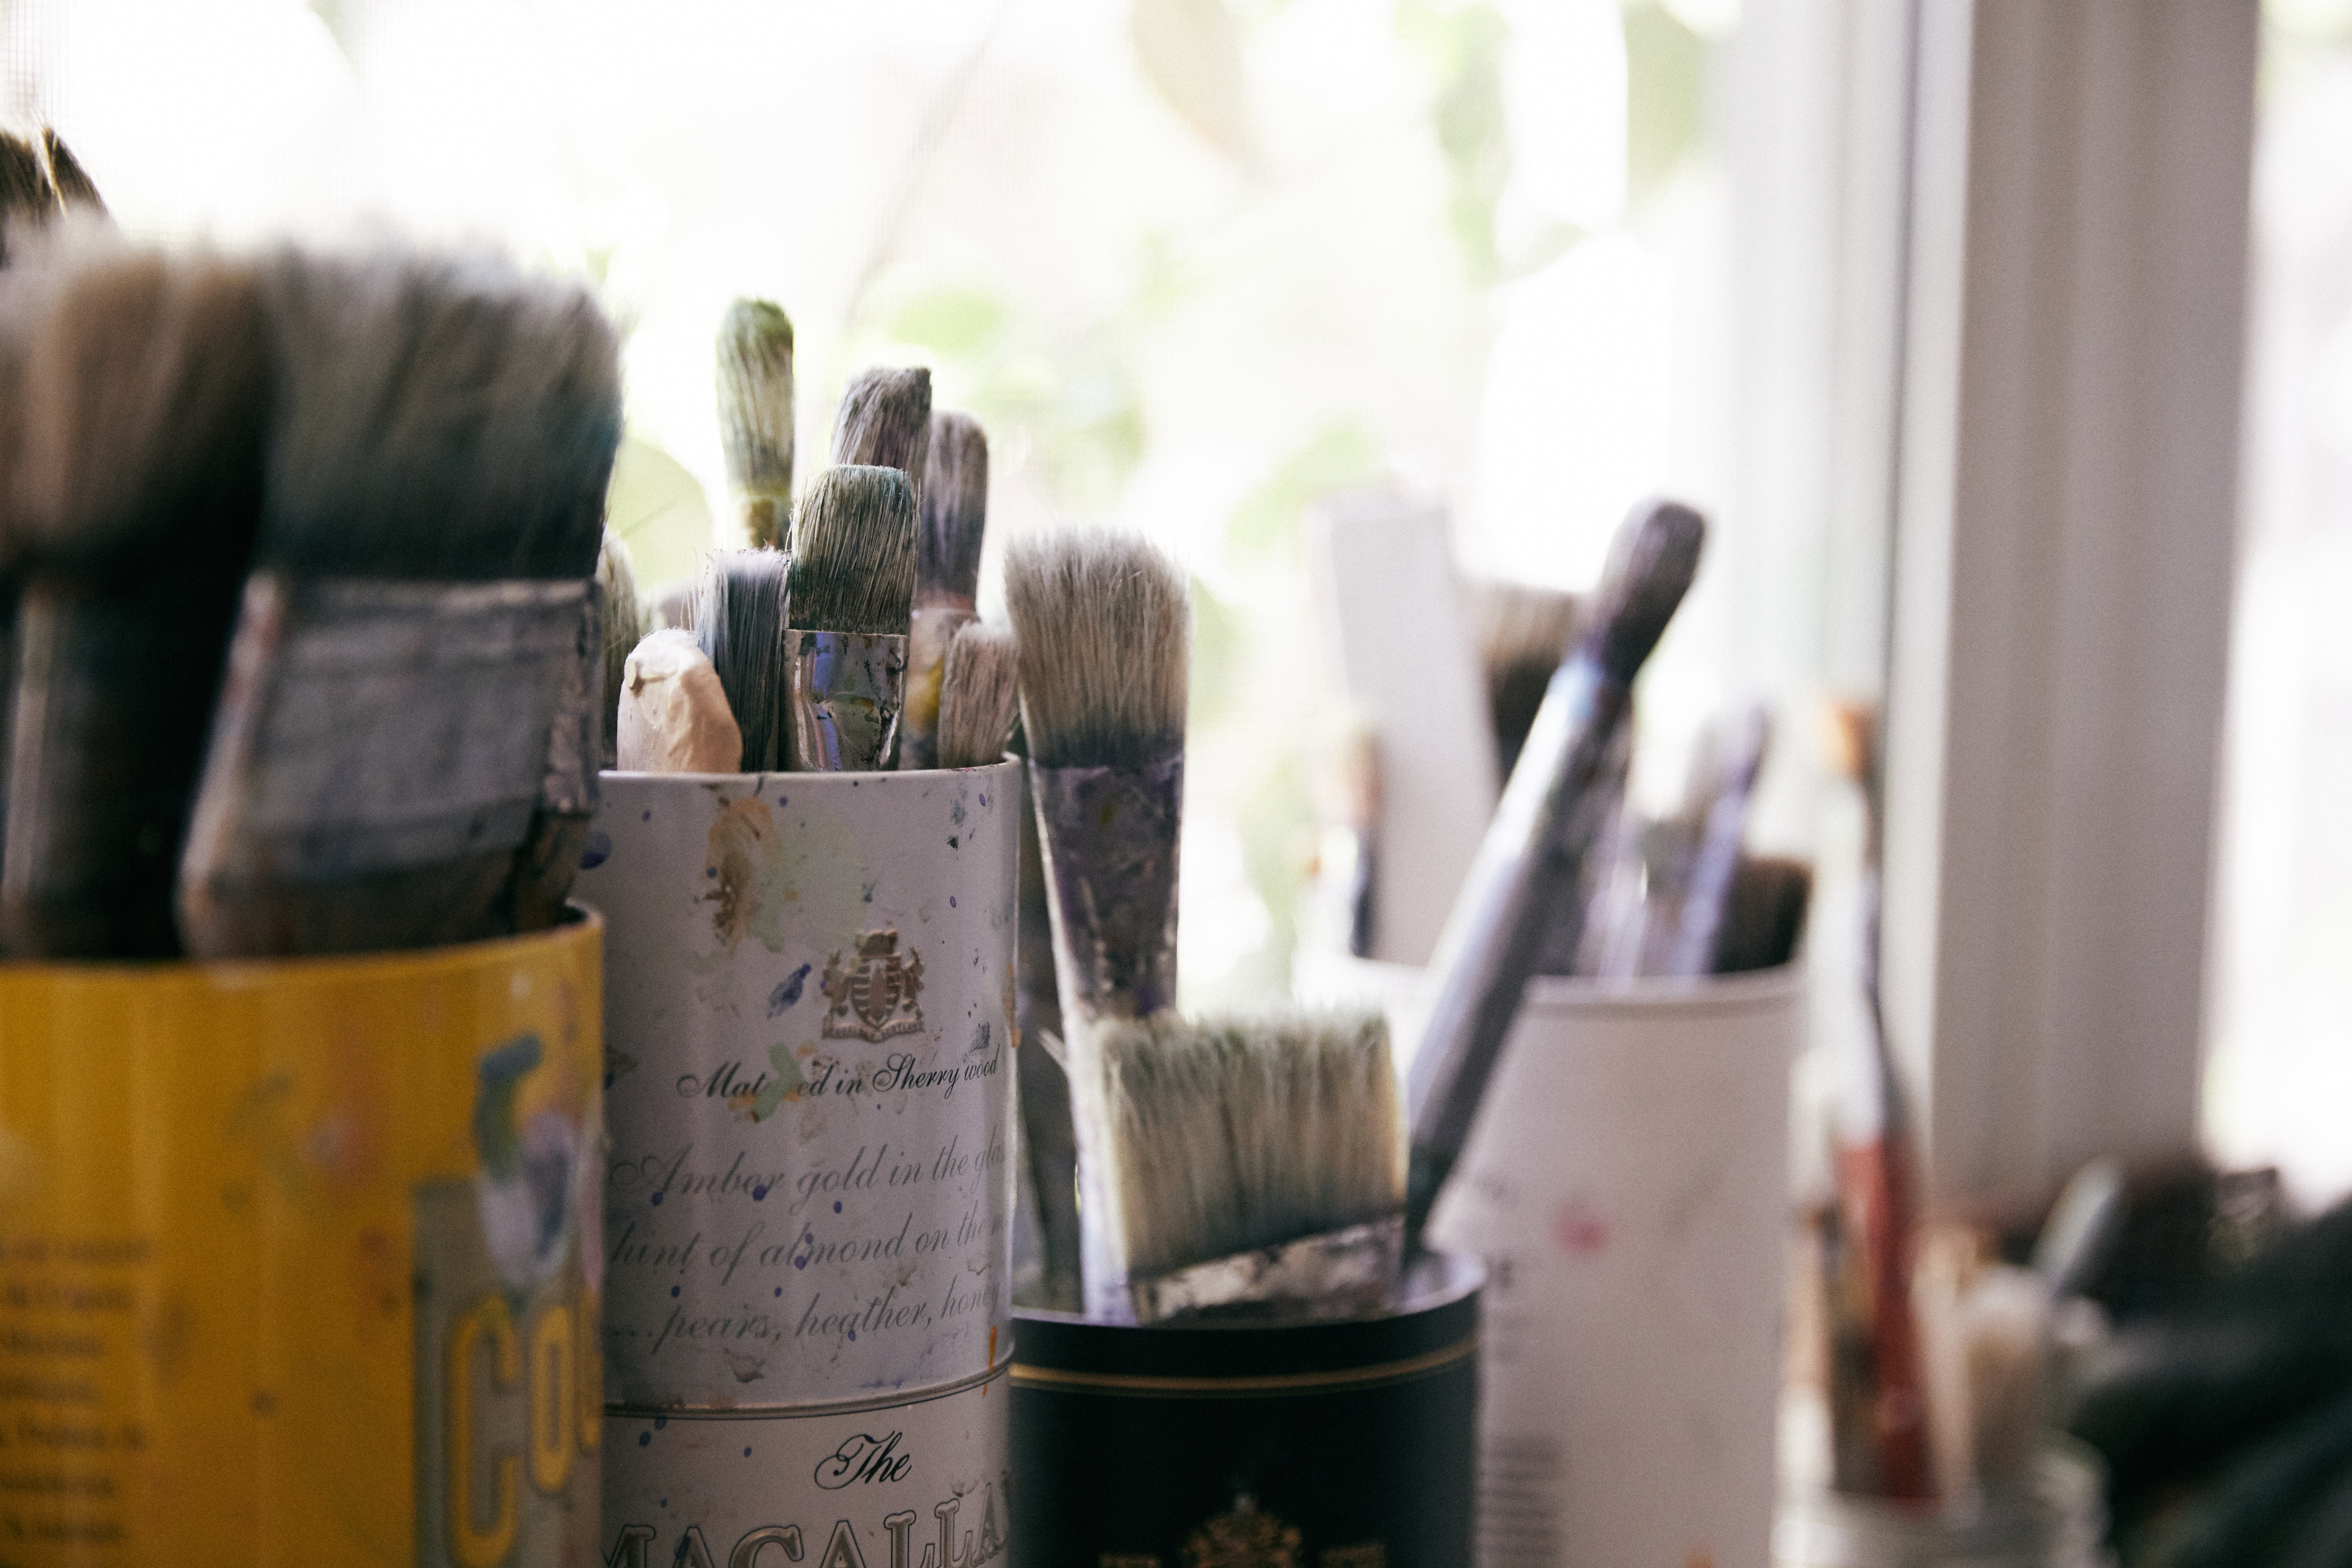 A closeup photo of paint brushes in an art studio